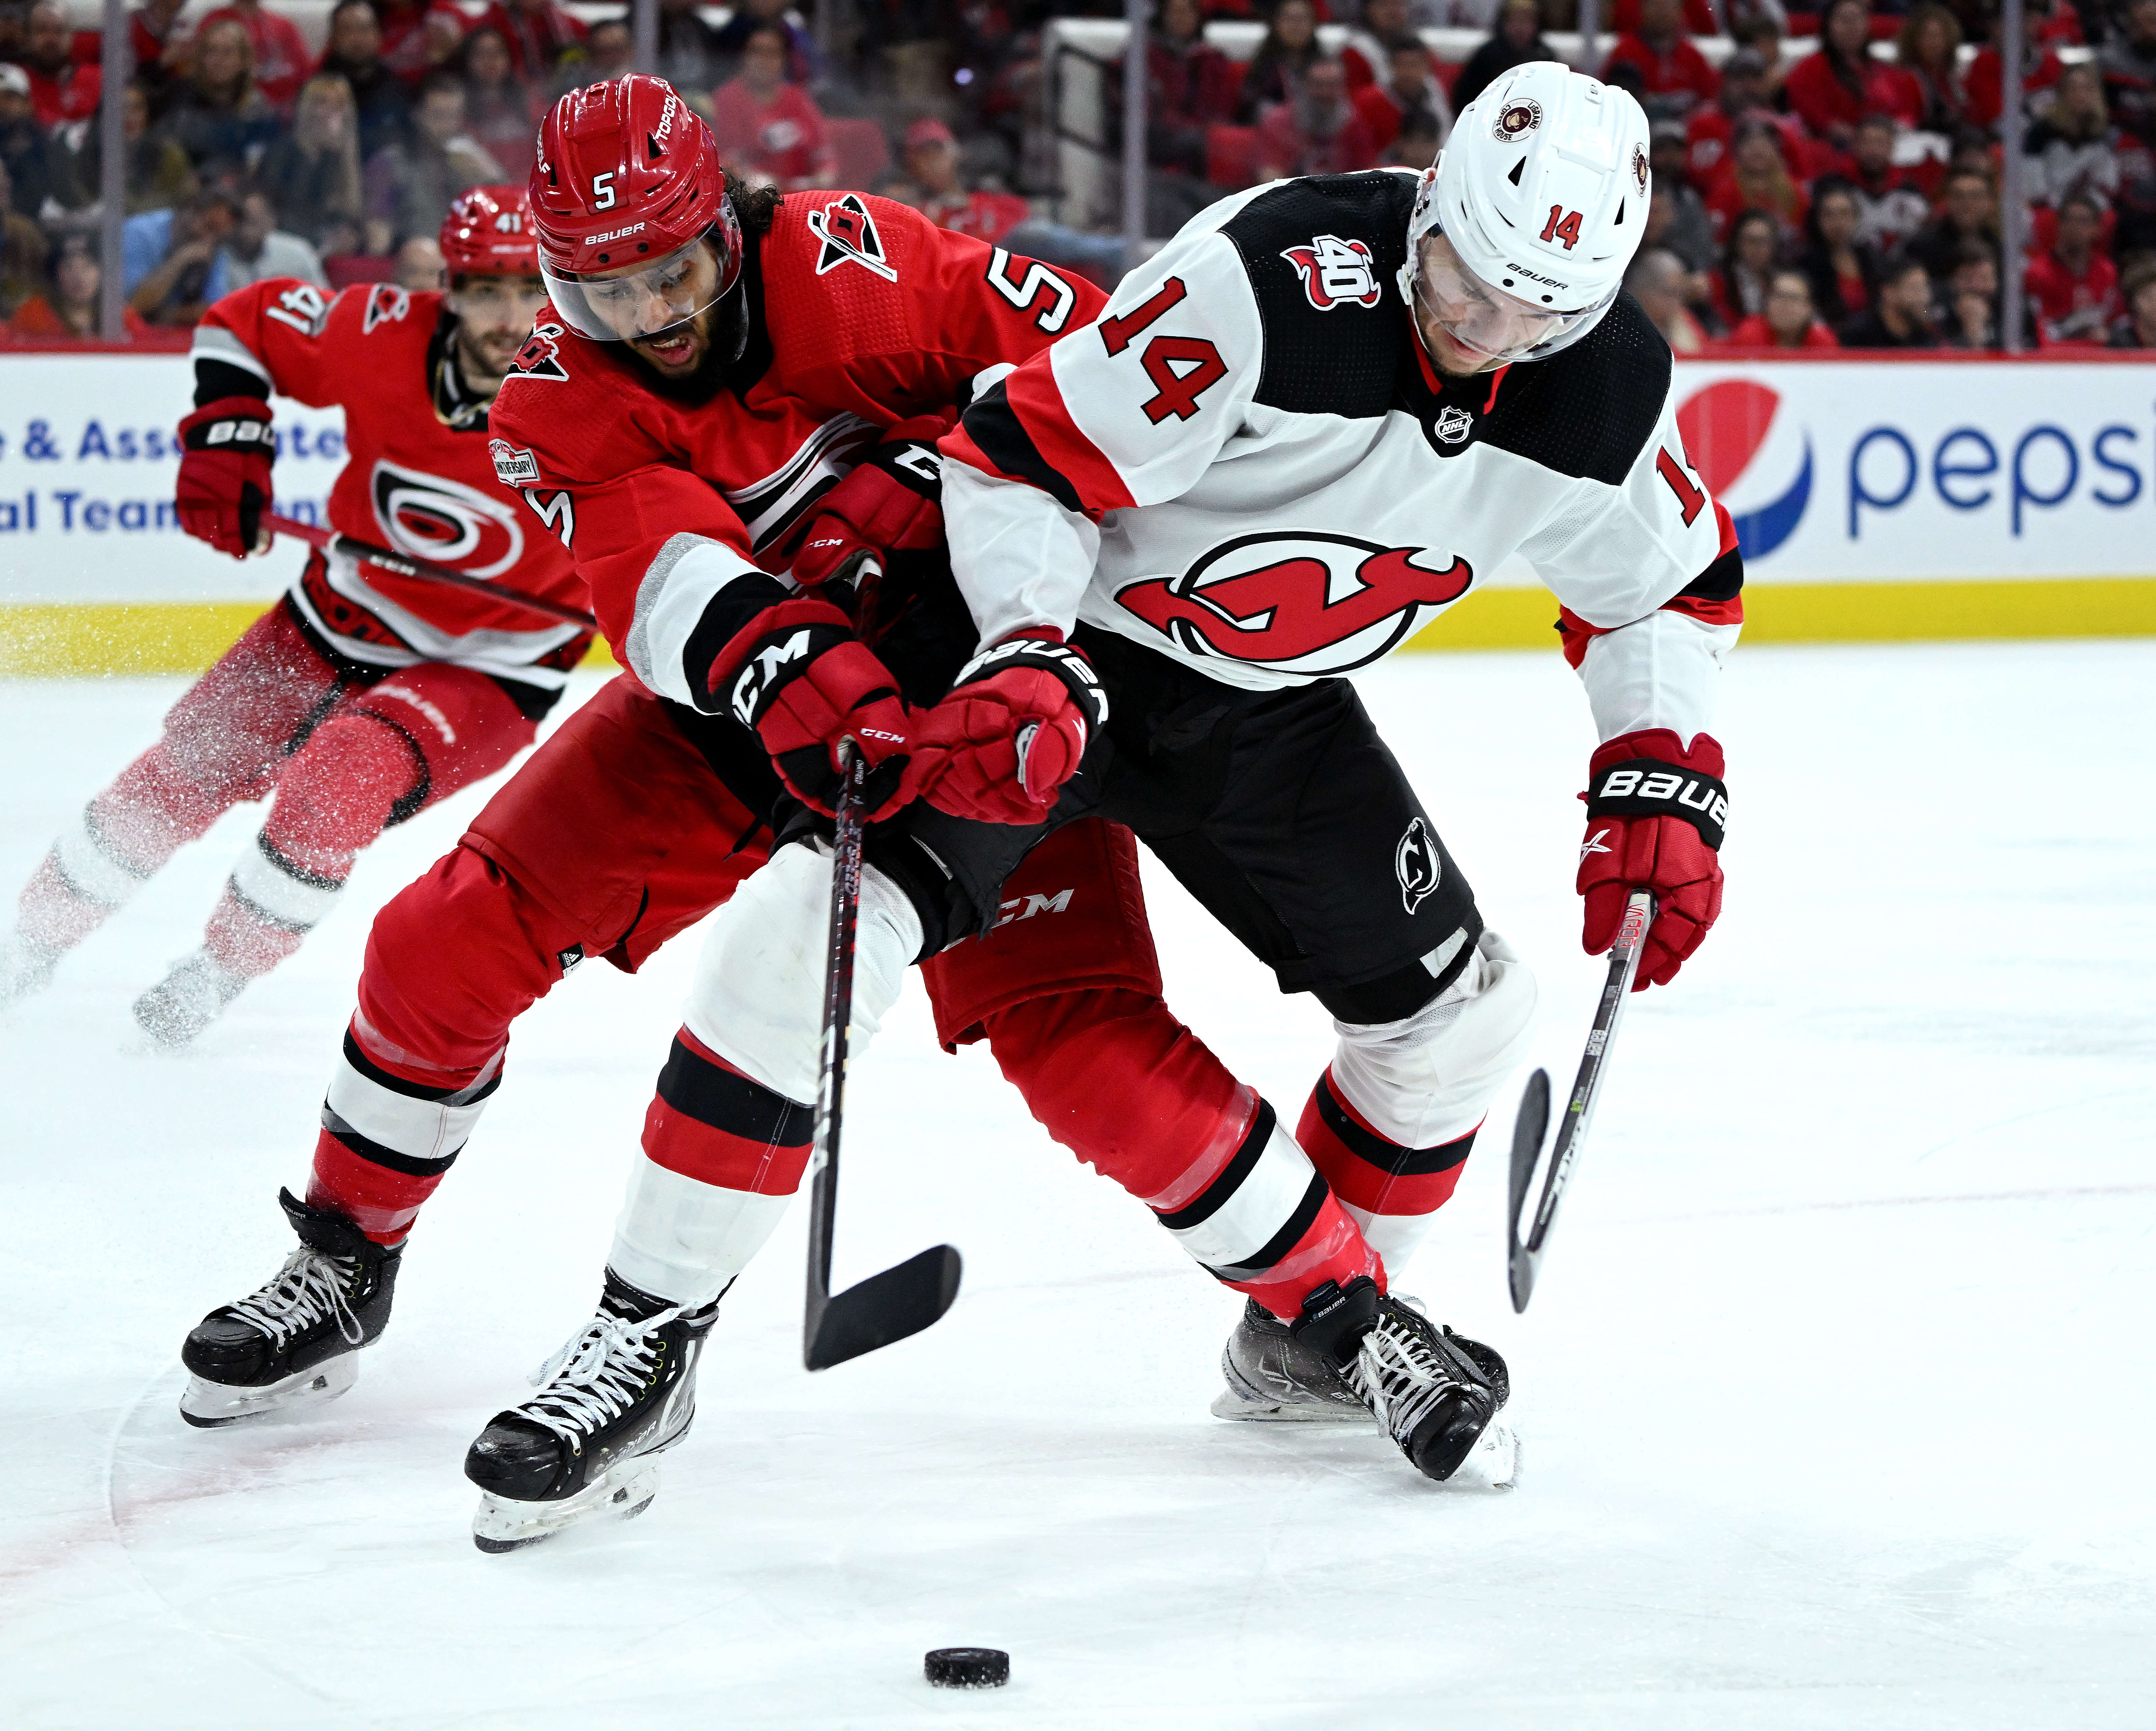 Devils vs. Hurricanes: Schedule, TV channel, tickets for series